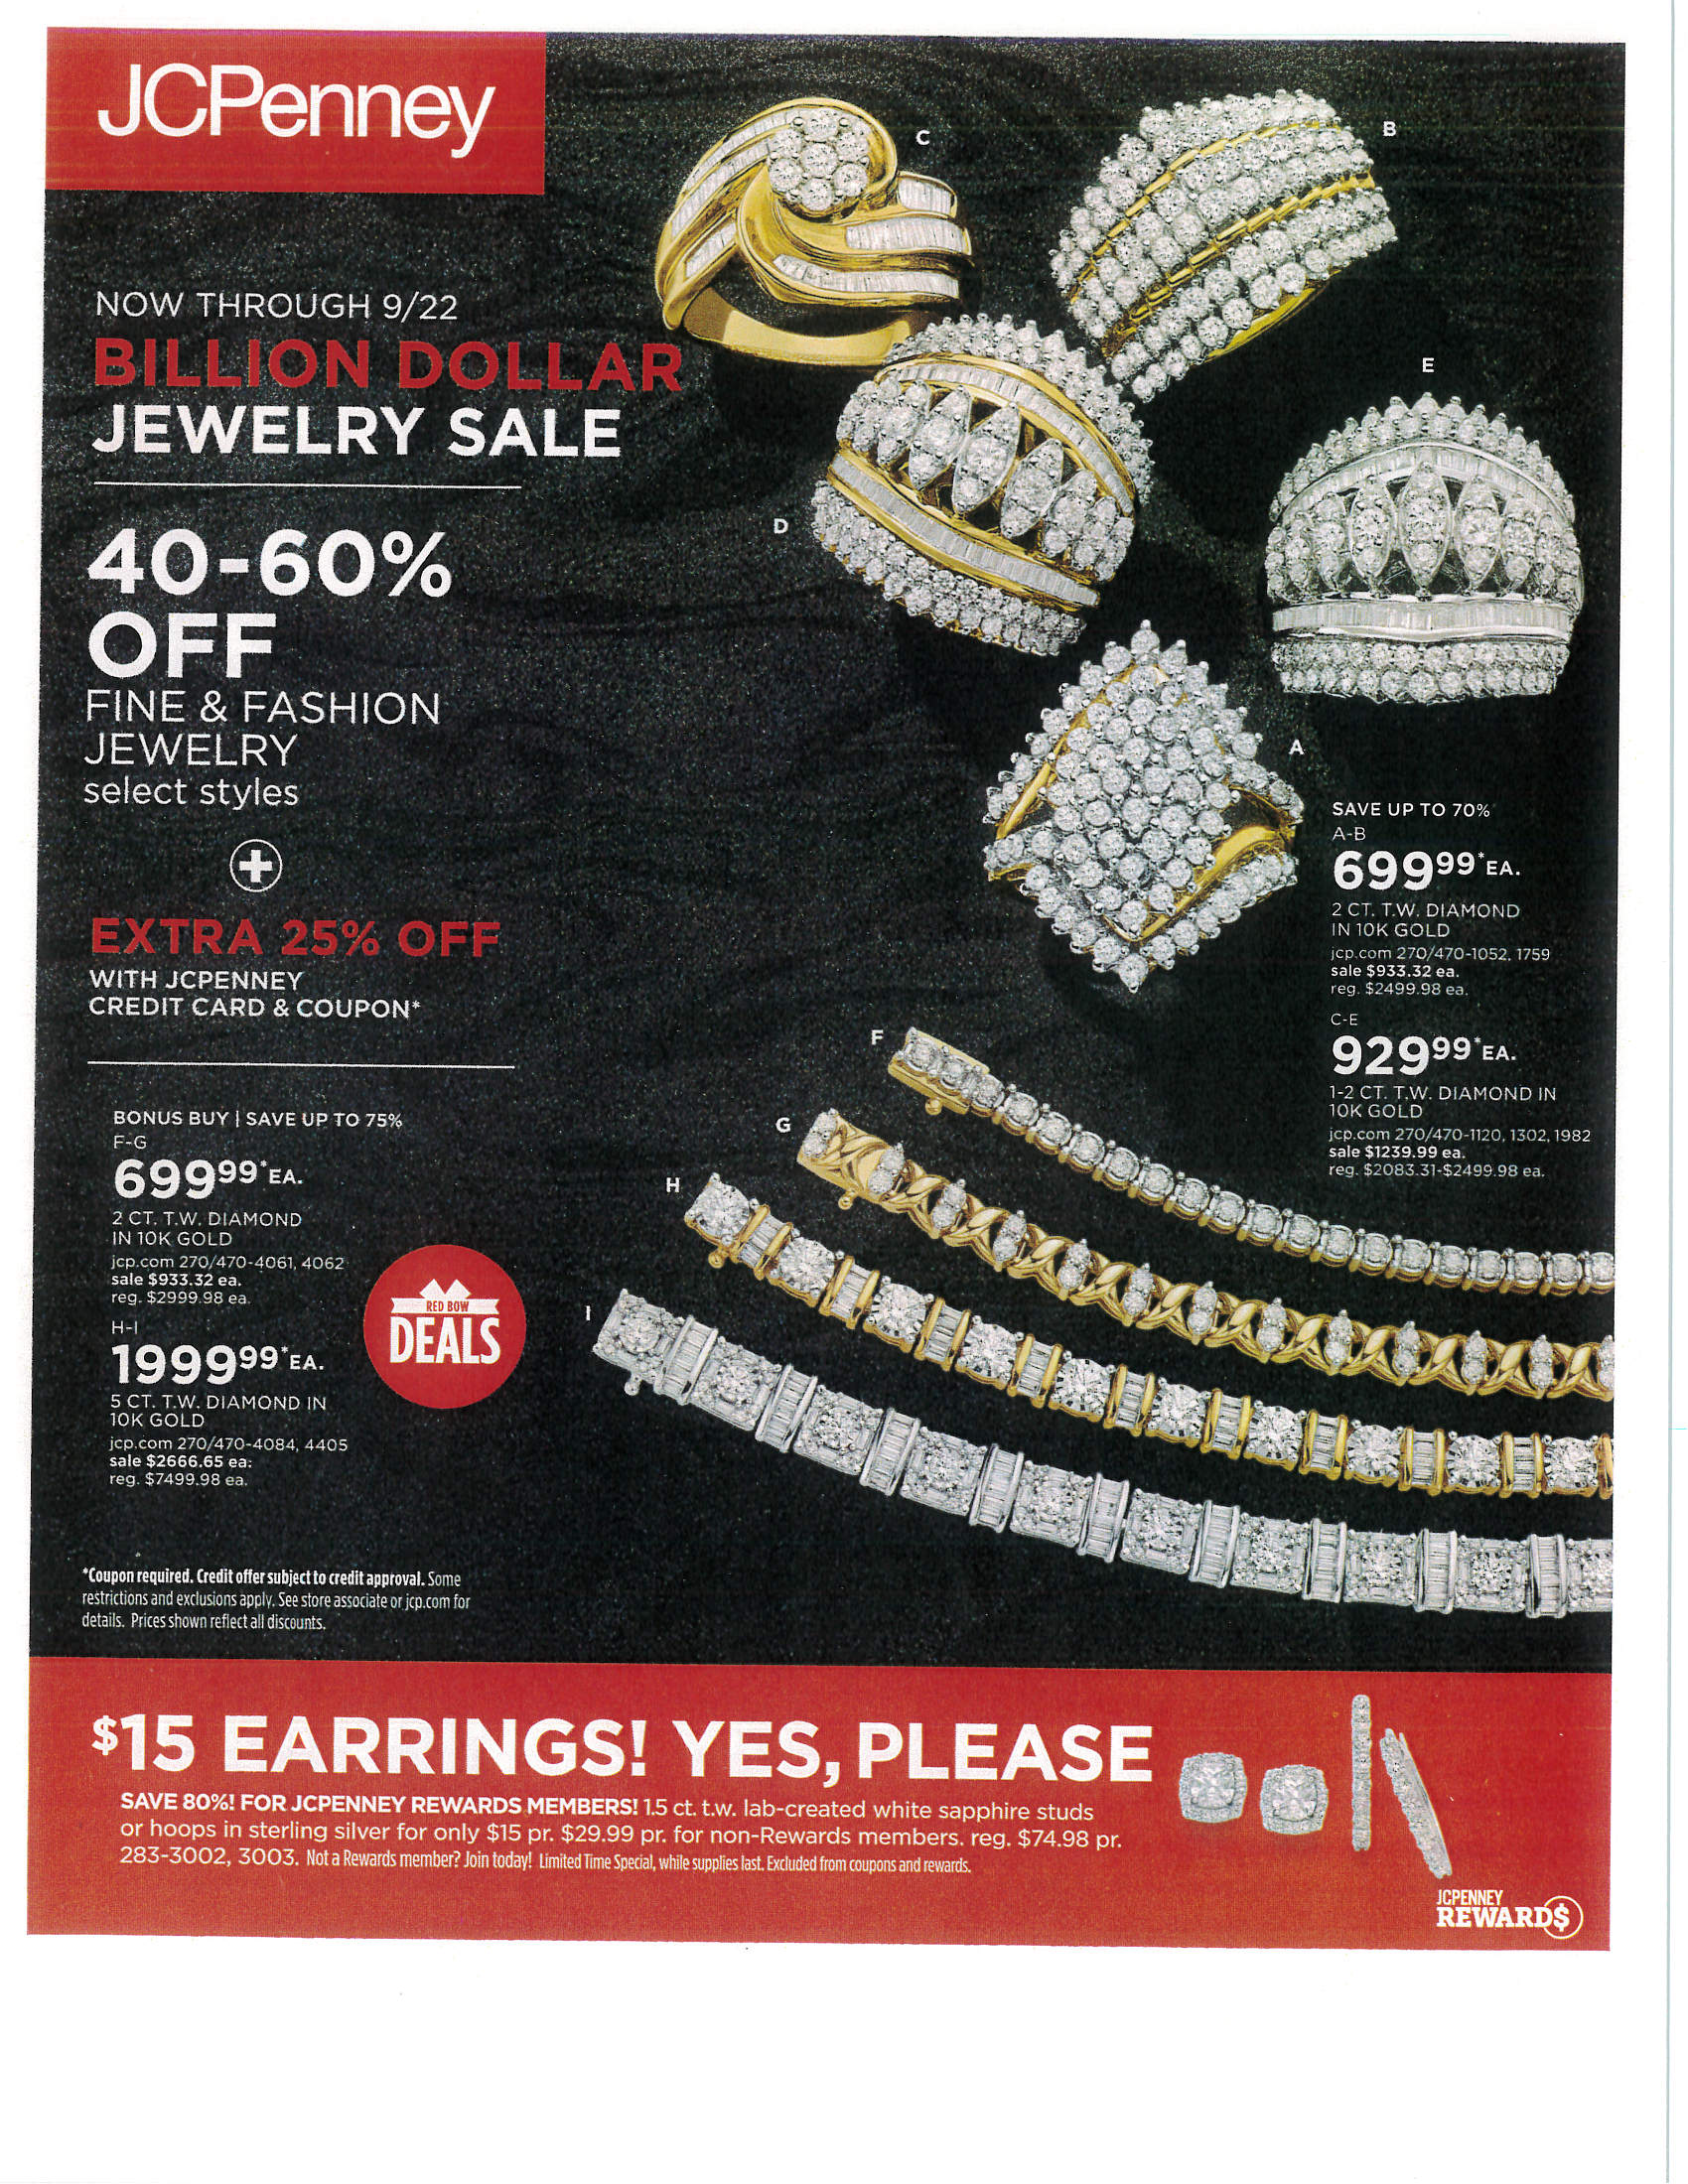 Flinthills Mall - Come SHOP fine jewelry on SALE at JCPenney